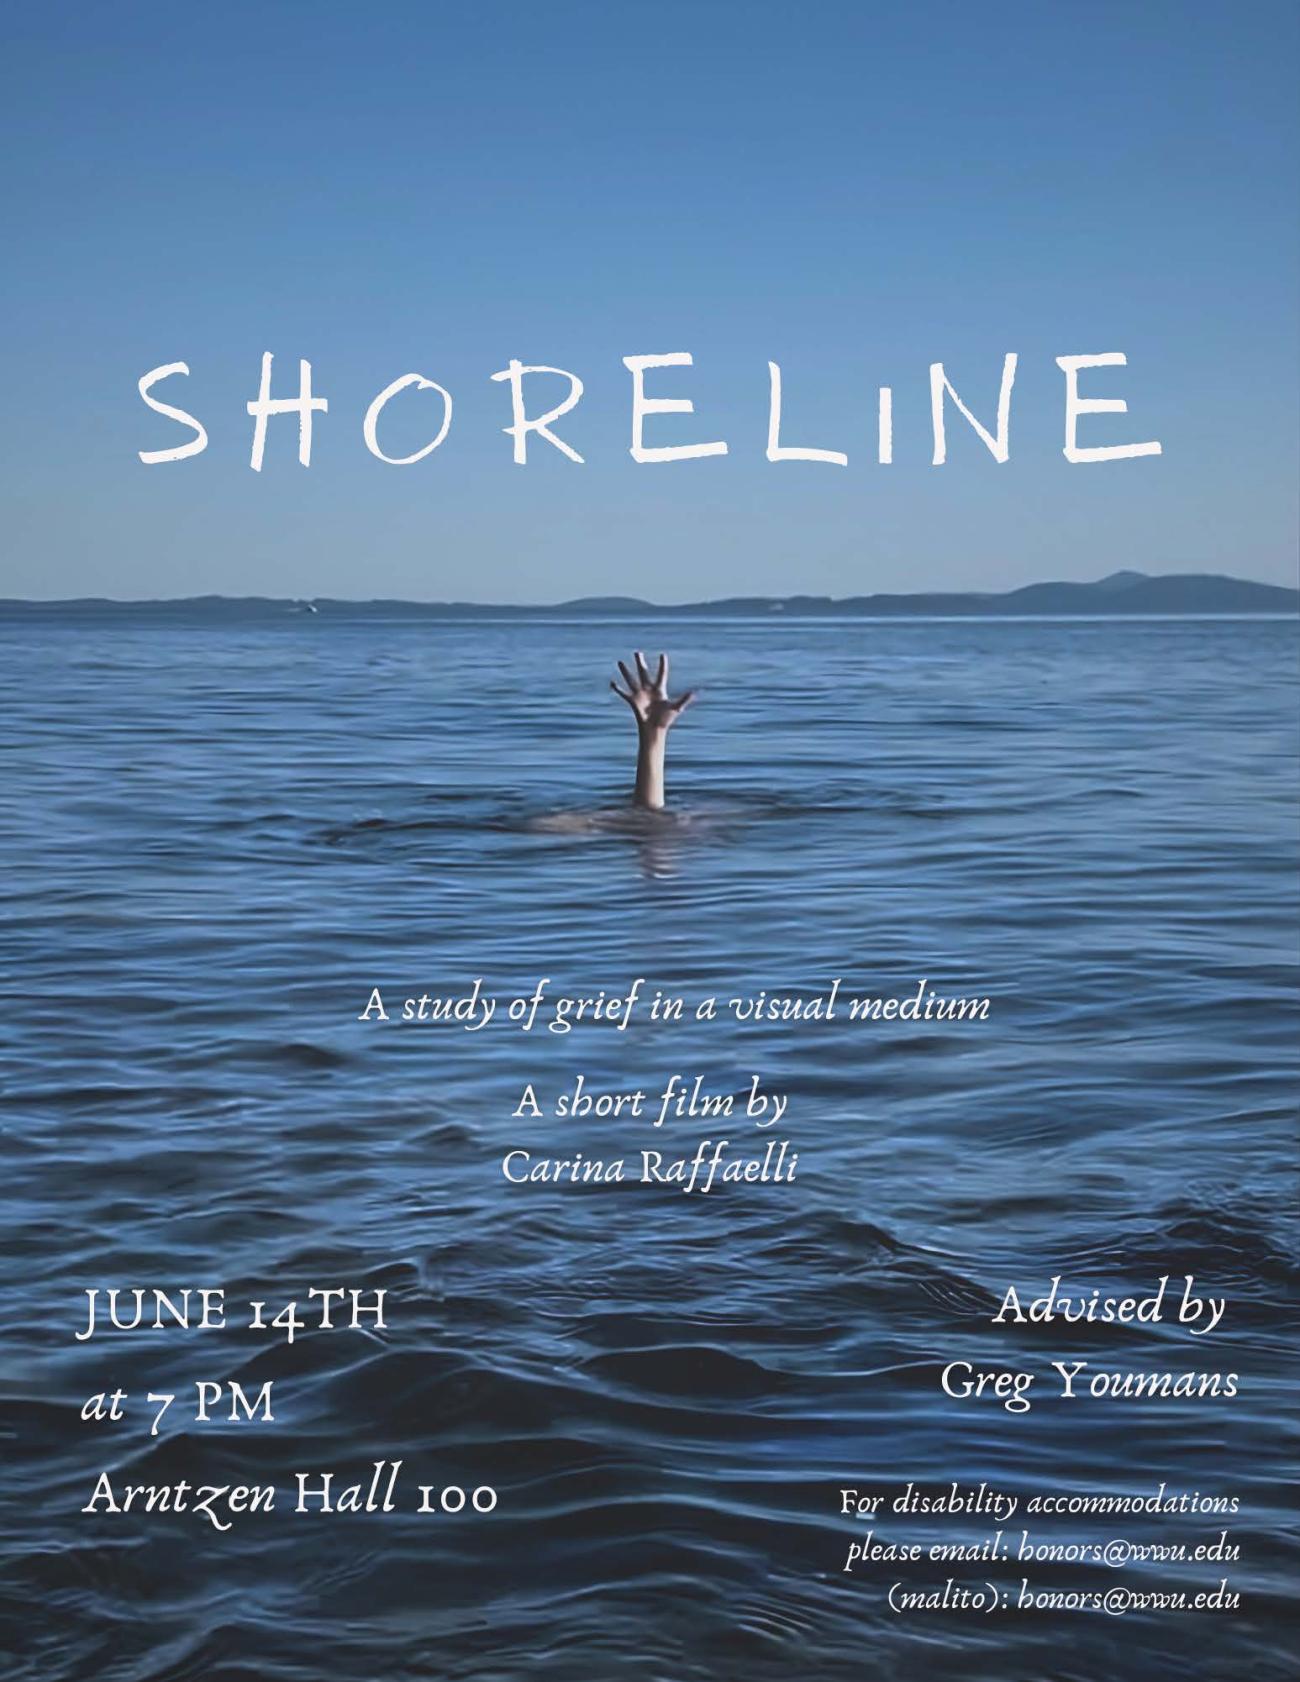 A photo of rippling blue water in the ocean and a blue sky above the horizon. In the middle of the water, a hand is emerged reaching towards the sky. In the sky, the title reads "SHORELINE," and the water below includes the following text: "A study of grief in a visual medium. A short film by Carina Raffaelli. June 14th, at 7pm, Arntzen Hall 100. Advised by Greg Youmans. For disability accommodations, please email: honors@wwu.edu (malito): honors@wwu.edu".